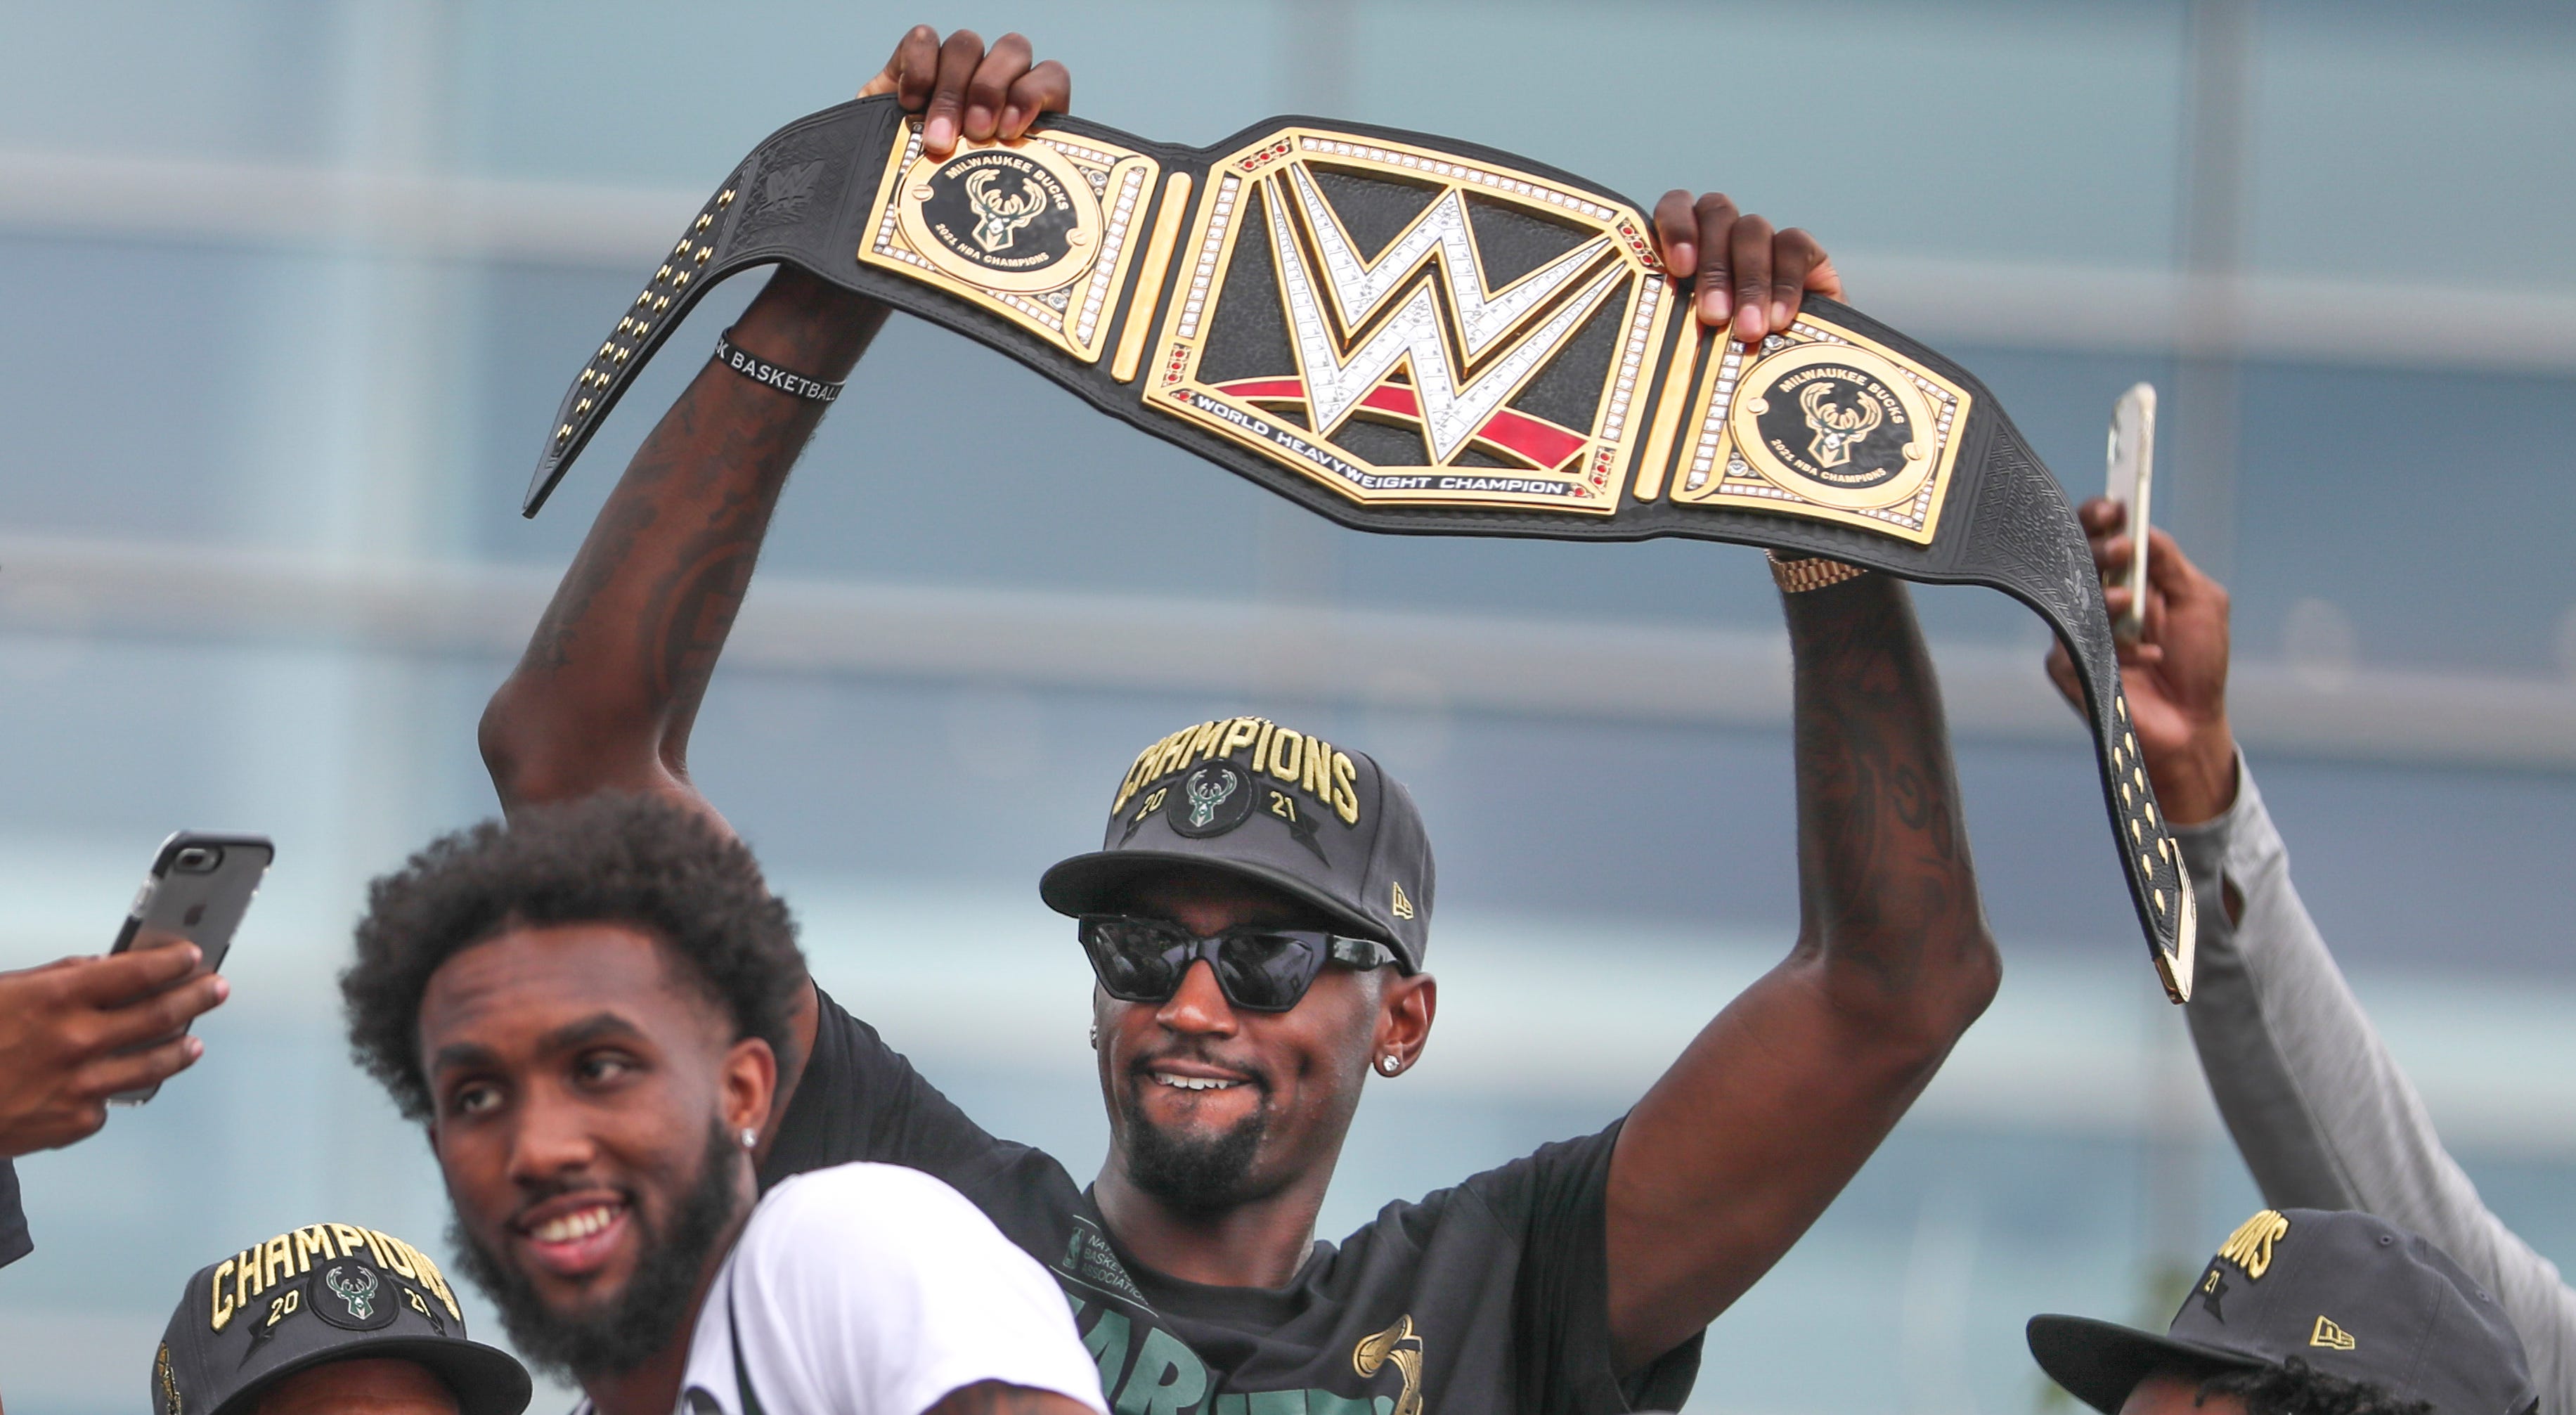 Why Does Bobby Portis Have a Wwe Belt